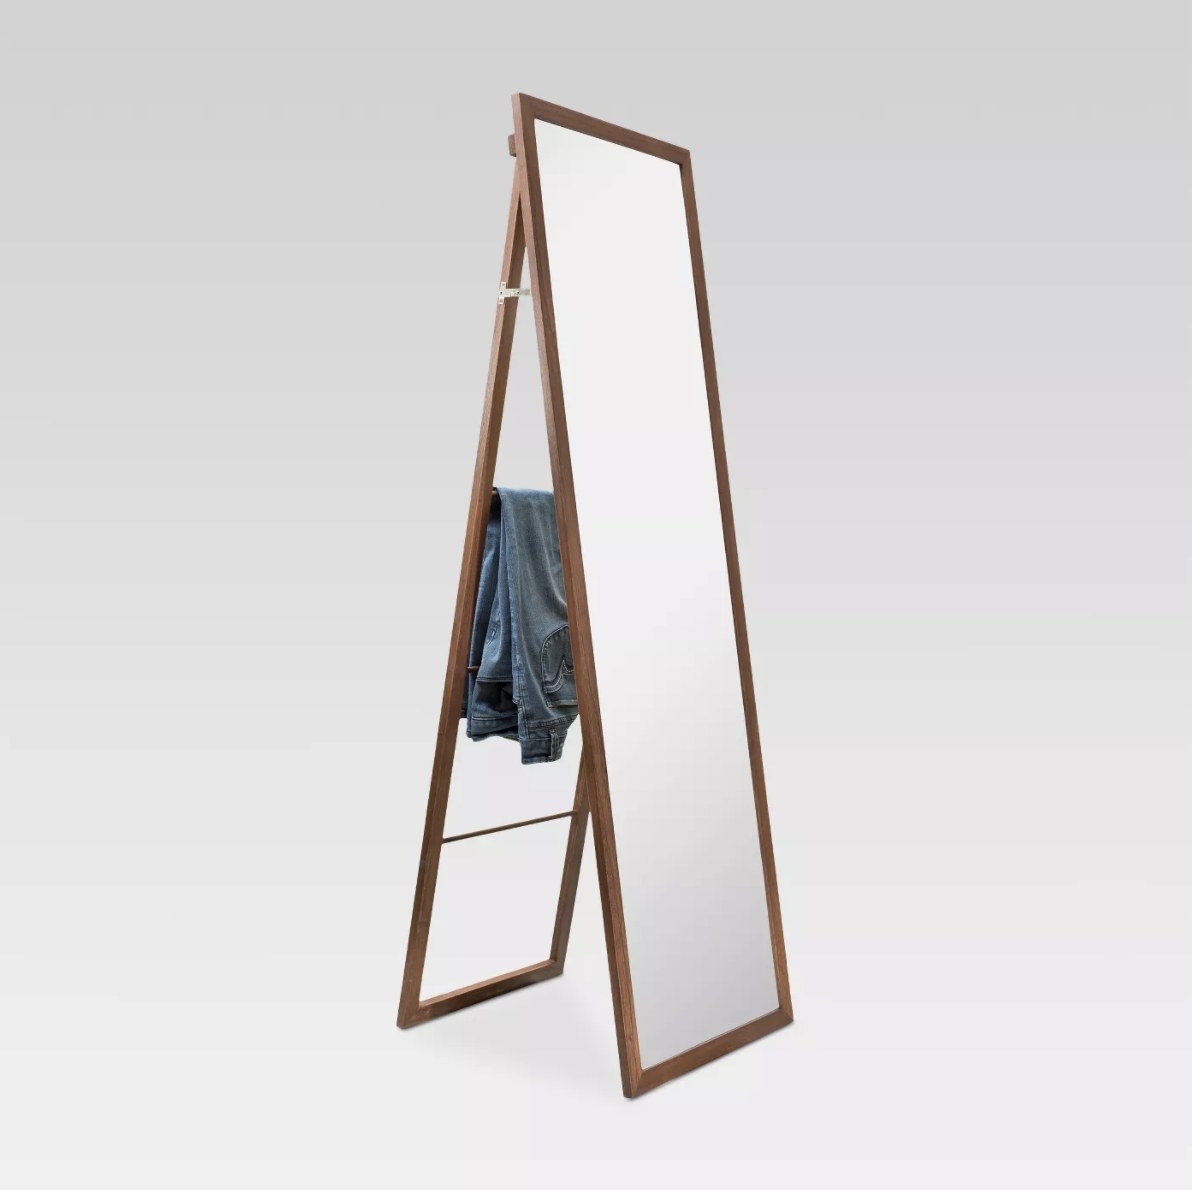 The brown wooden mirror has a pair of jeans laying on the ladder portion